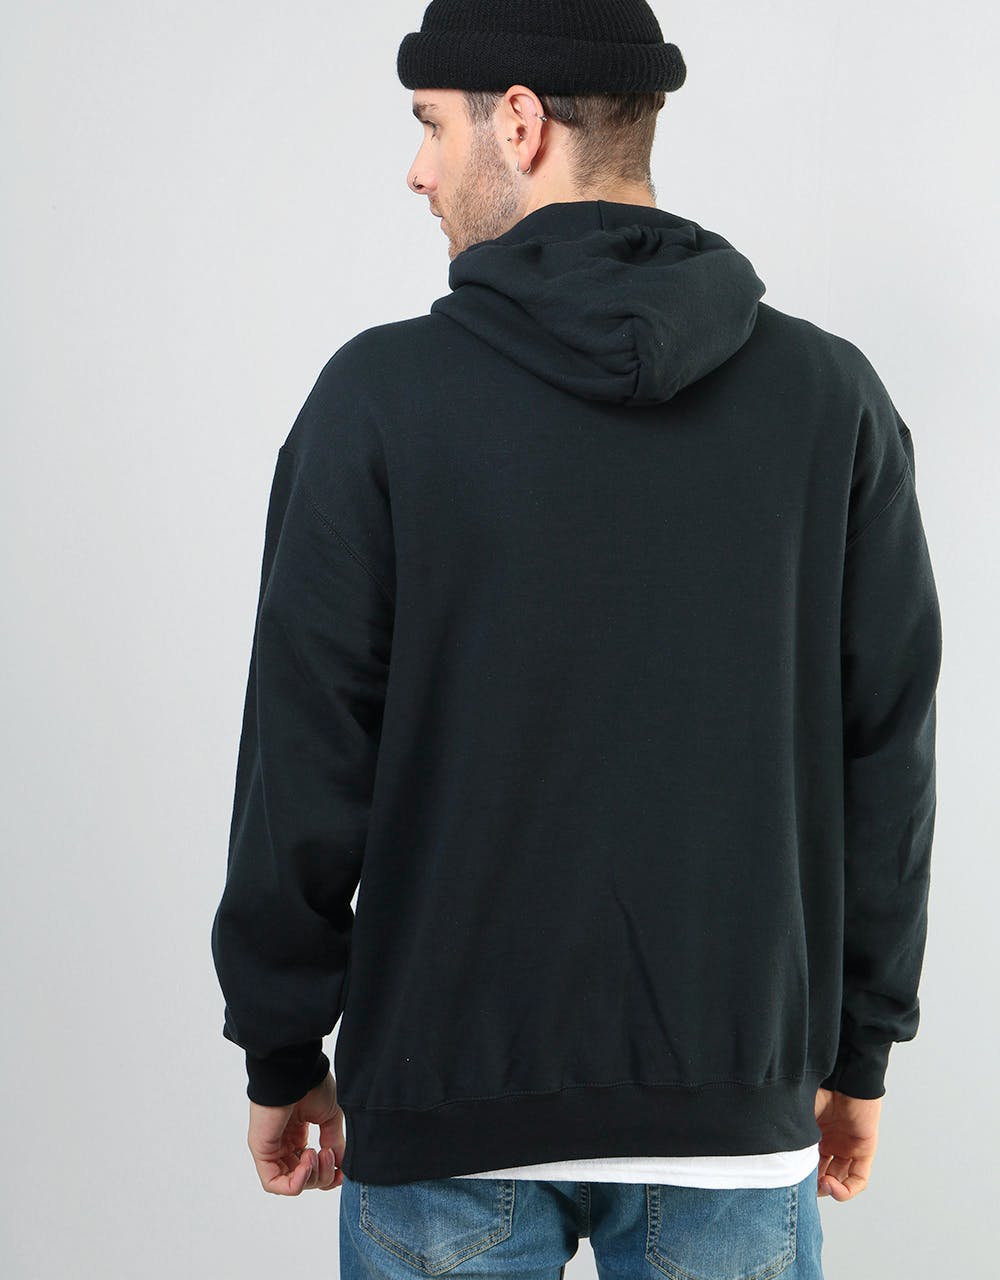 Theories How They Got Here Pullover Hoodie - Black